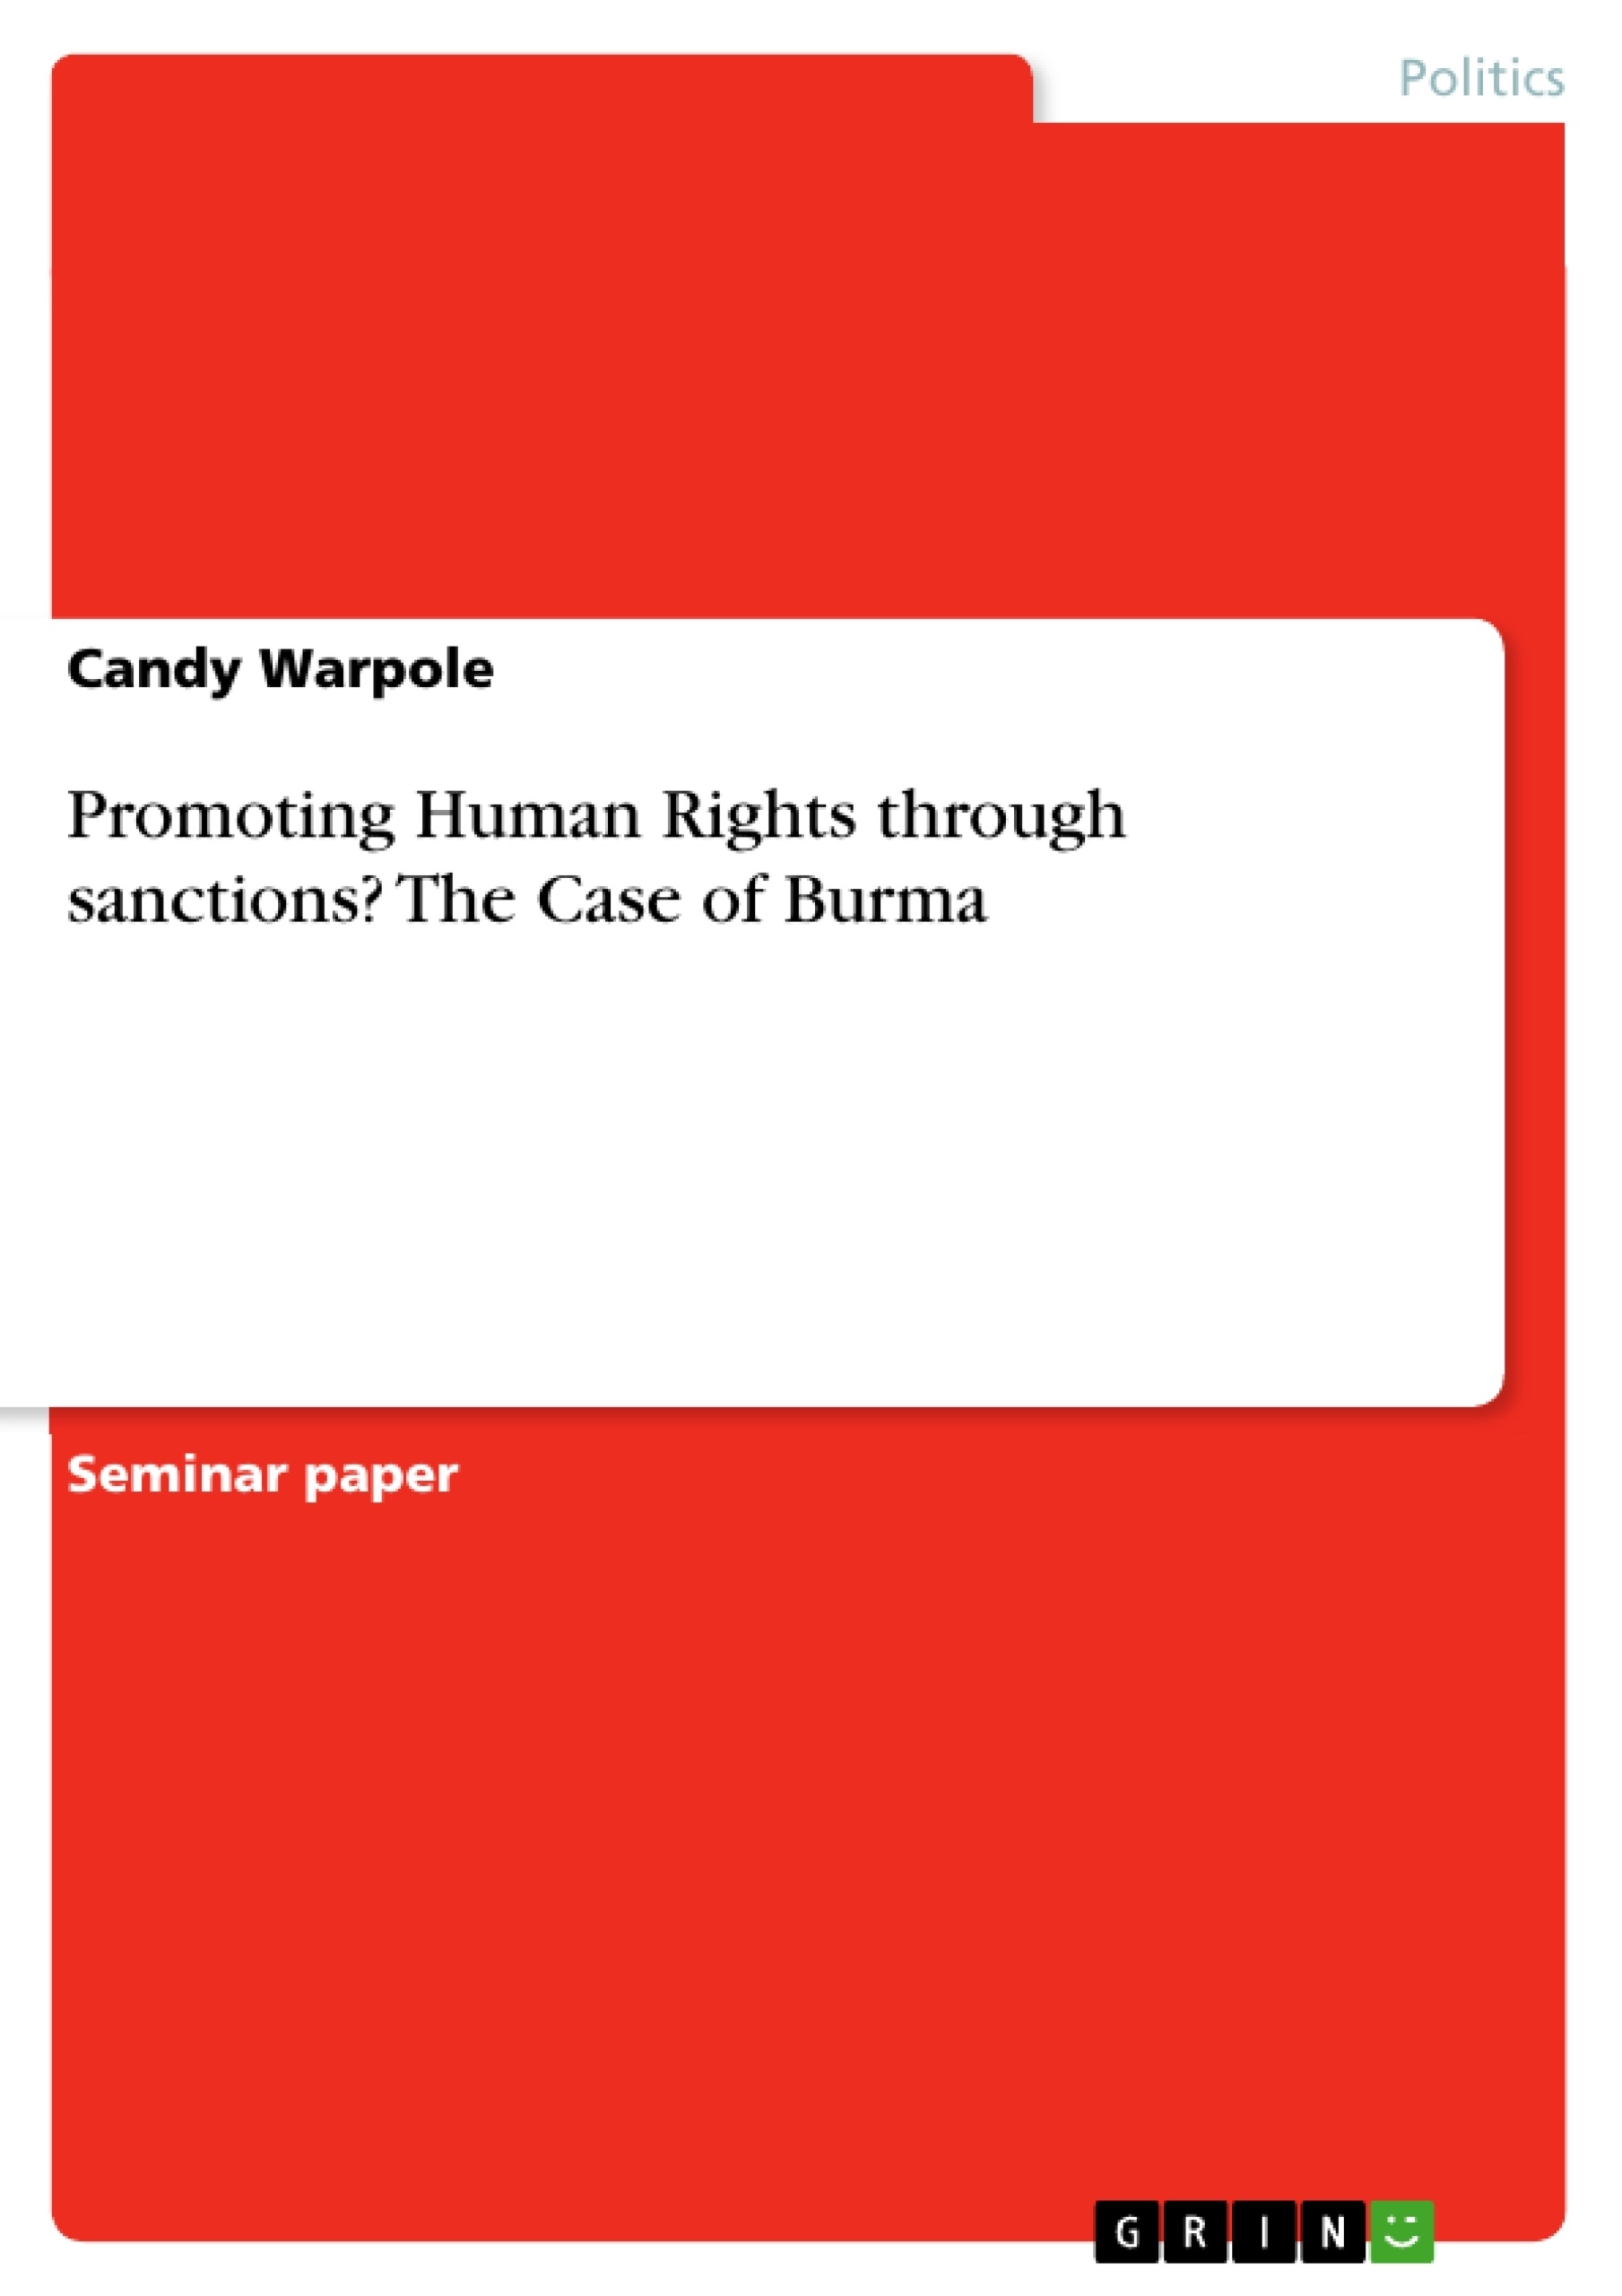 Título: Promoting Human Rights through sanctions? The Case of Burma